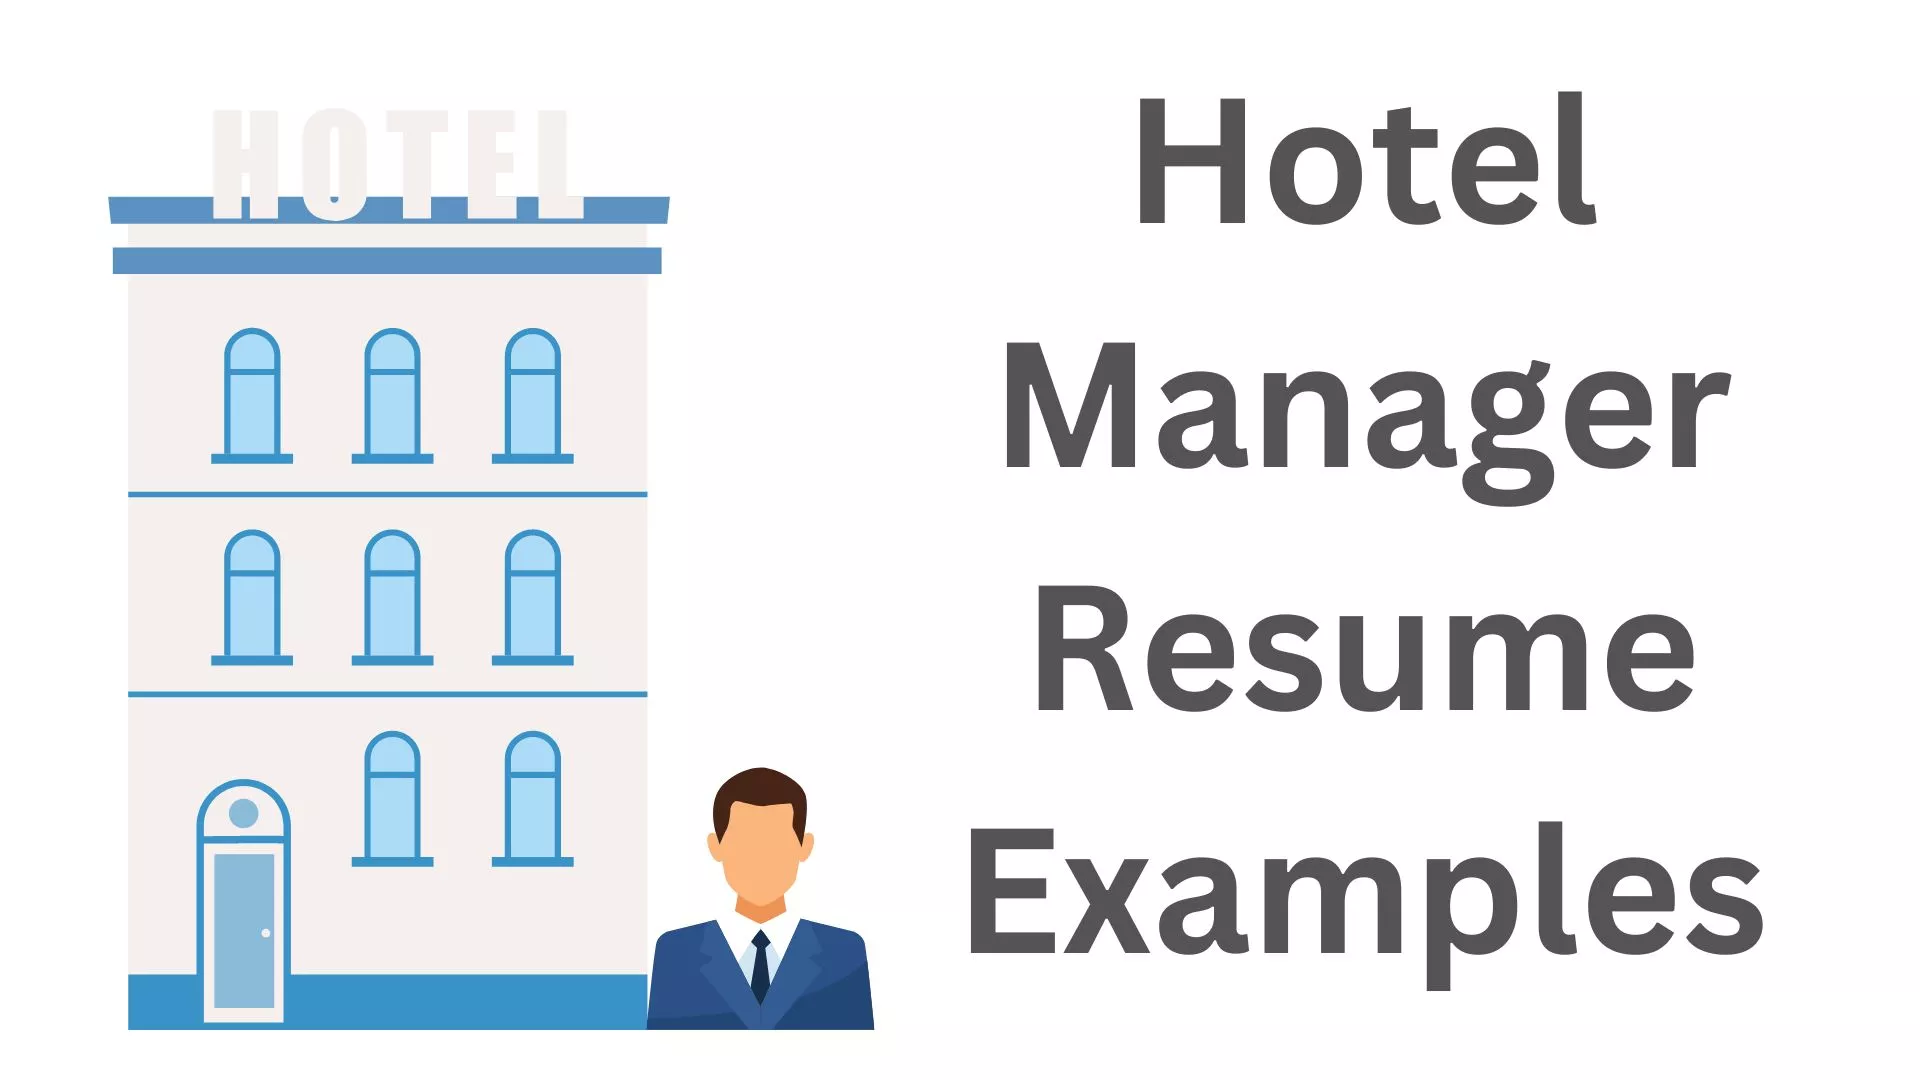 Hotel Manager Resume Examples.webp